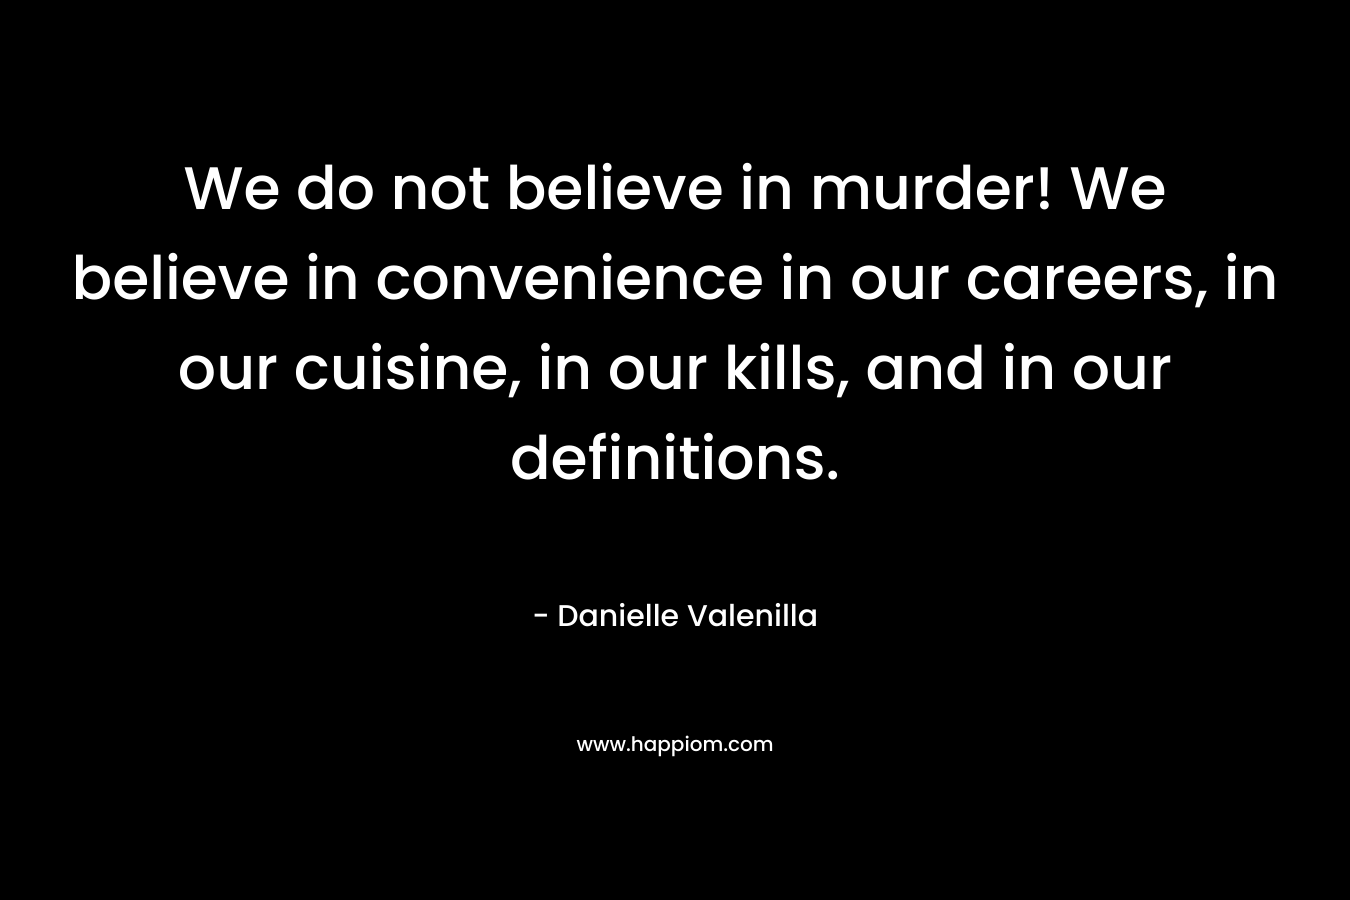 We do not believe in murder! We believe in convenience in our careers, in our cuisine, in our kills, and in our definitions.